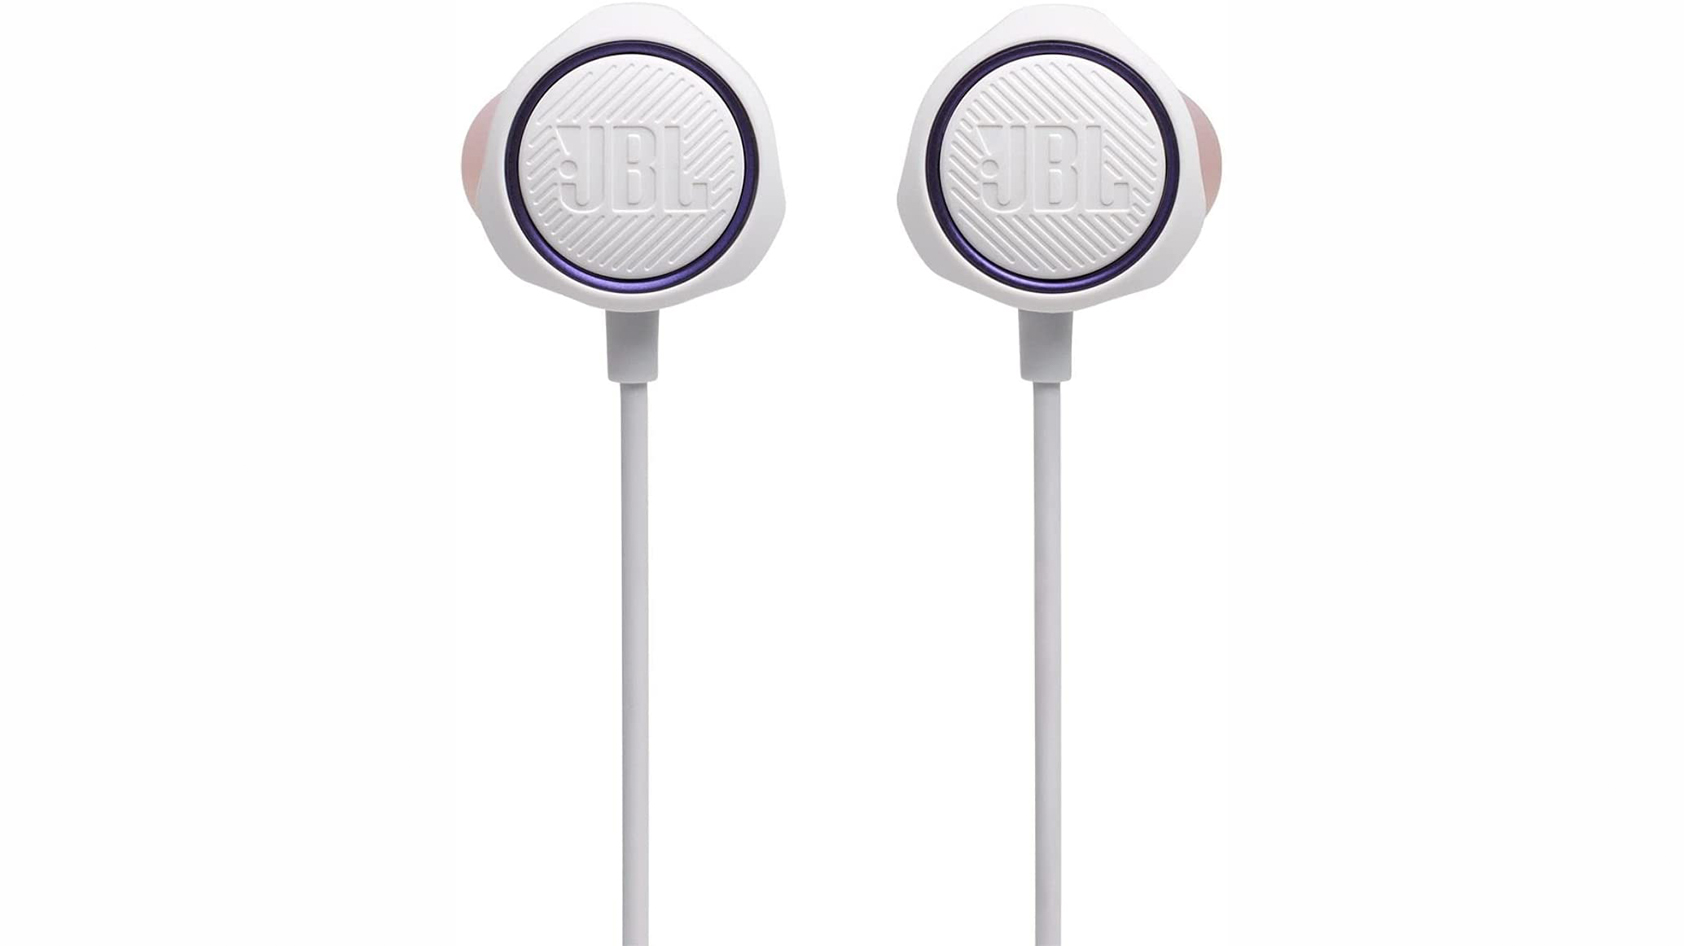 The JBL Quantum 50 wired earbuds in white against a white background.